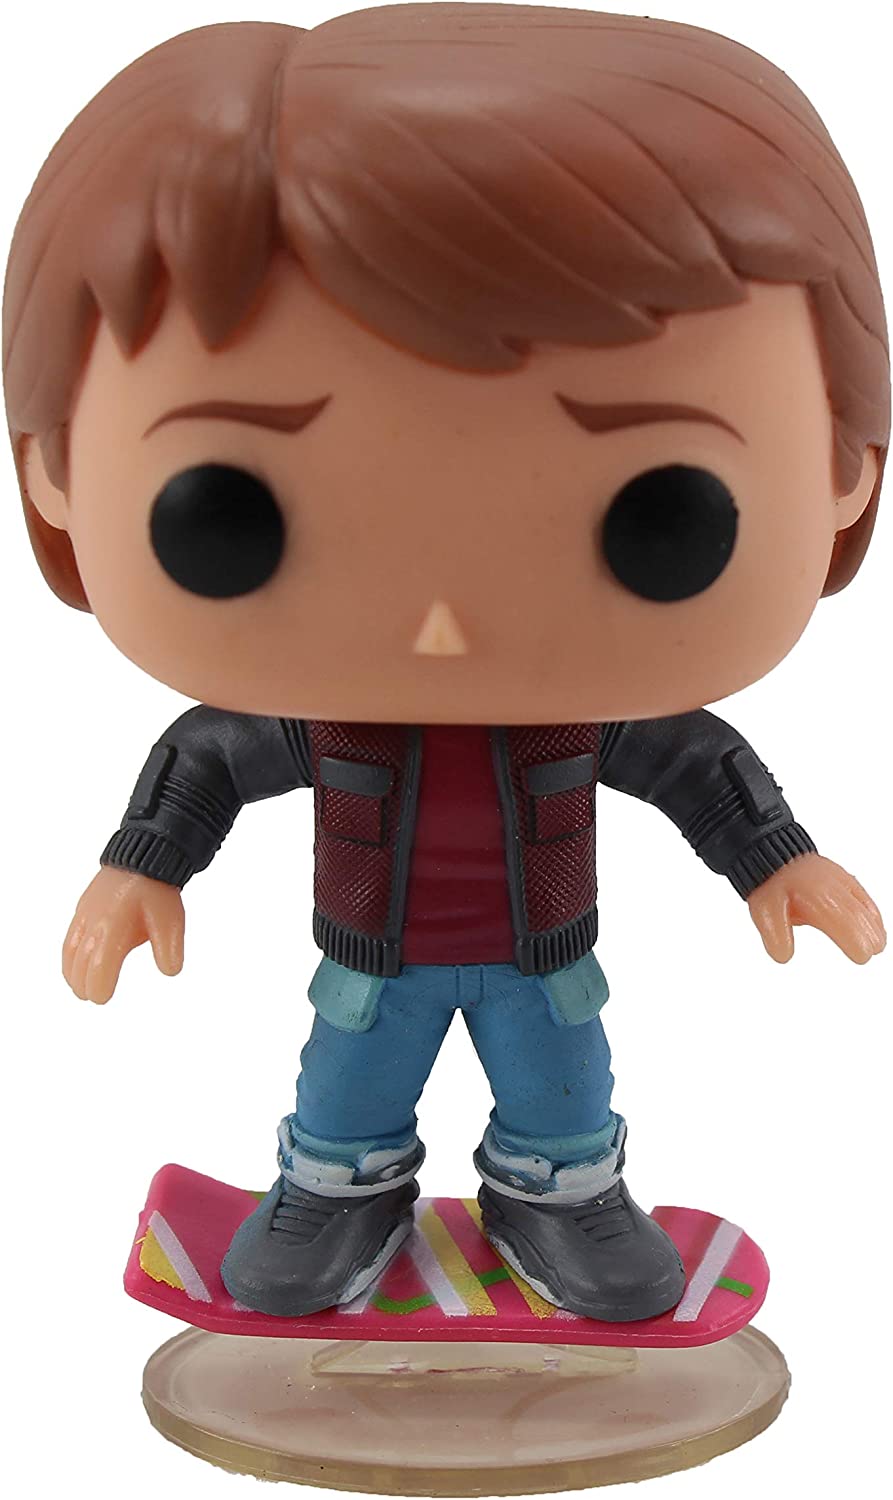 Back to The Future II Marty McFly On Hoverboard Funko Pop! Vinyl No. 245 - Toptoys2u